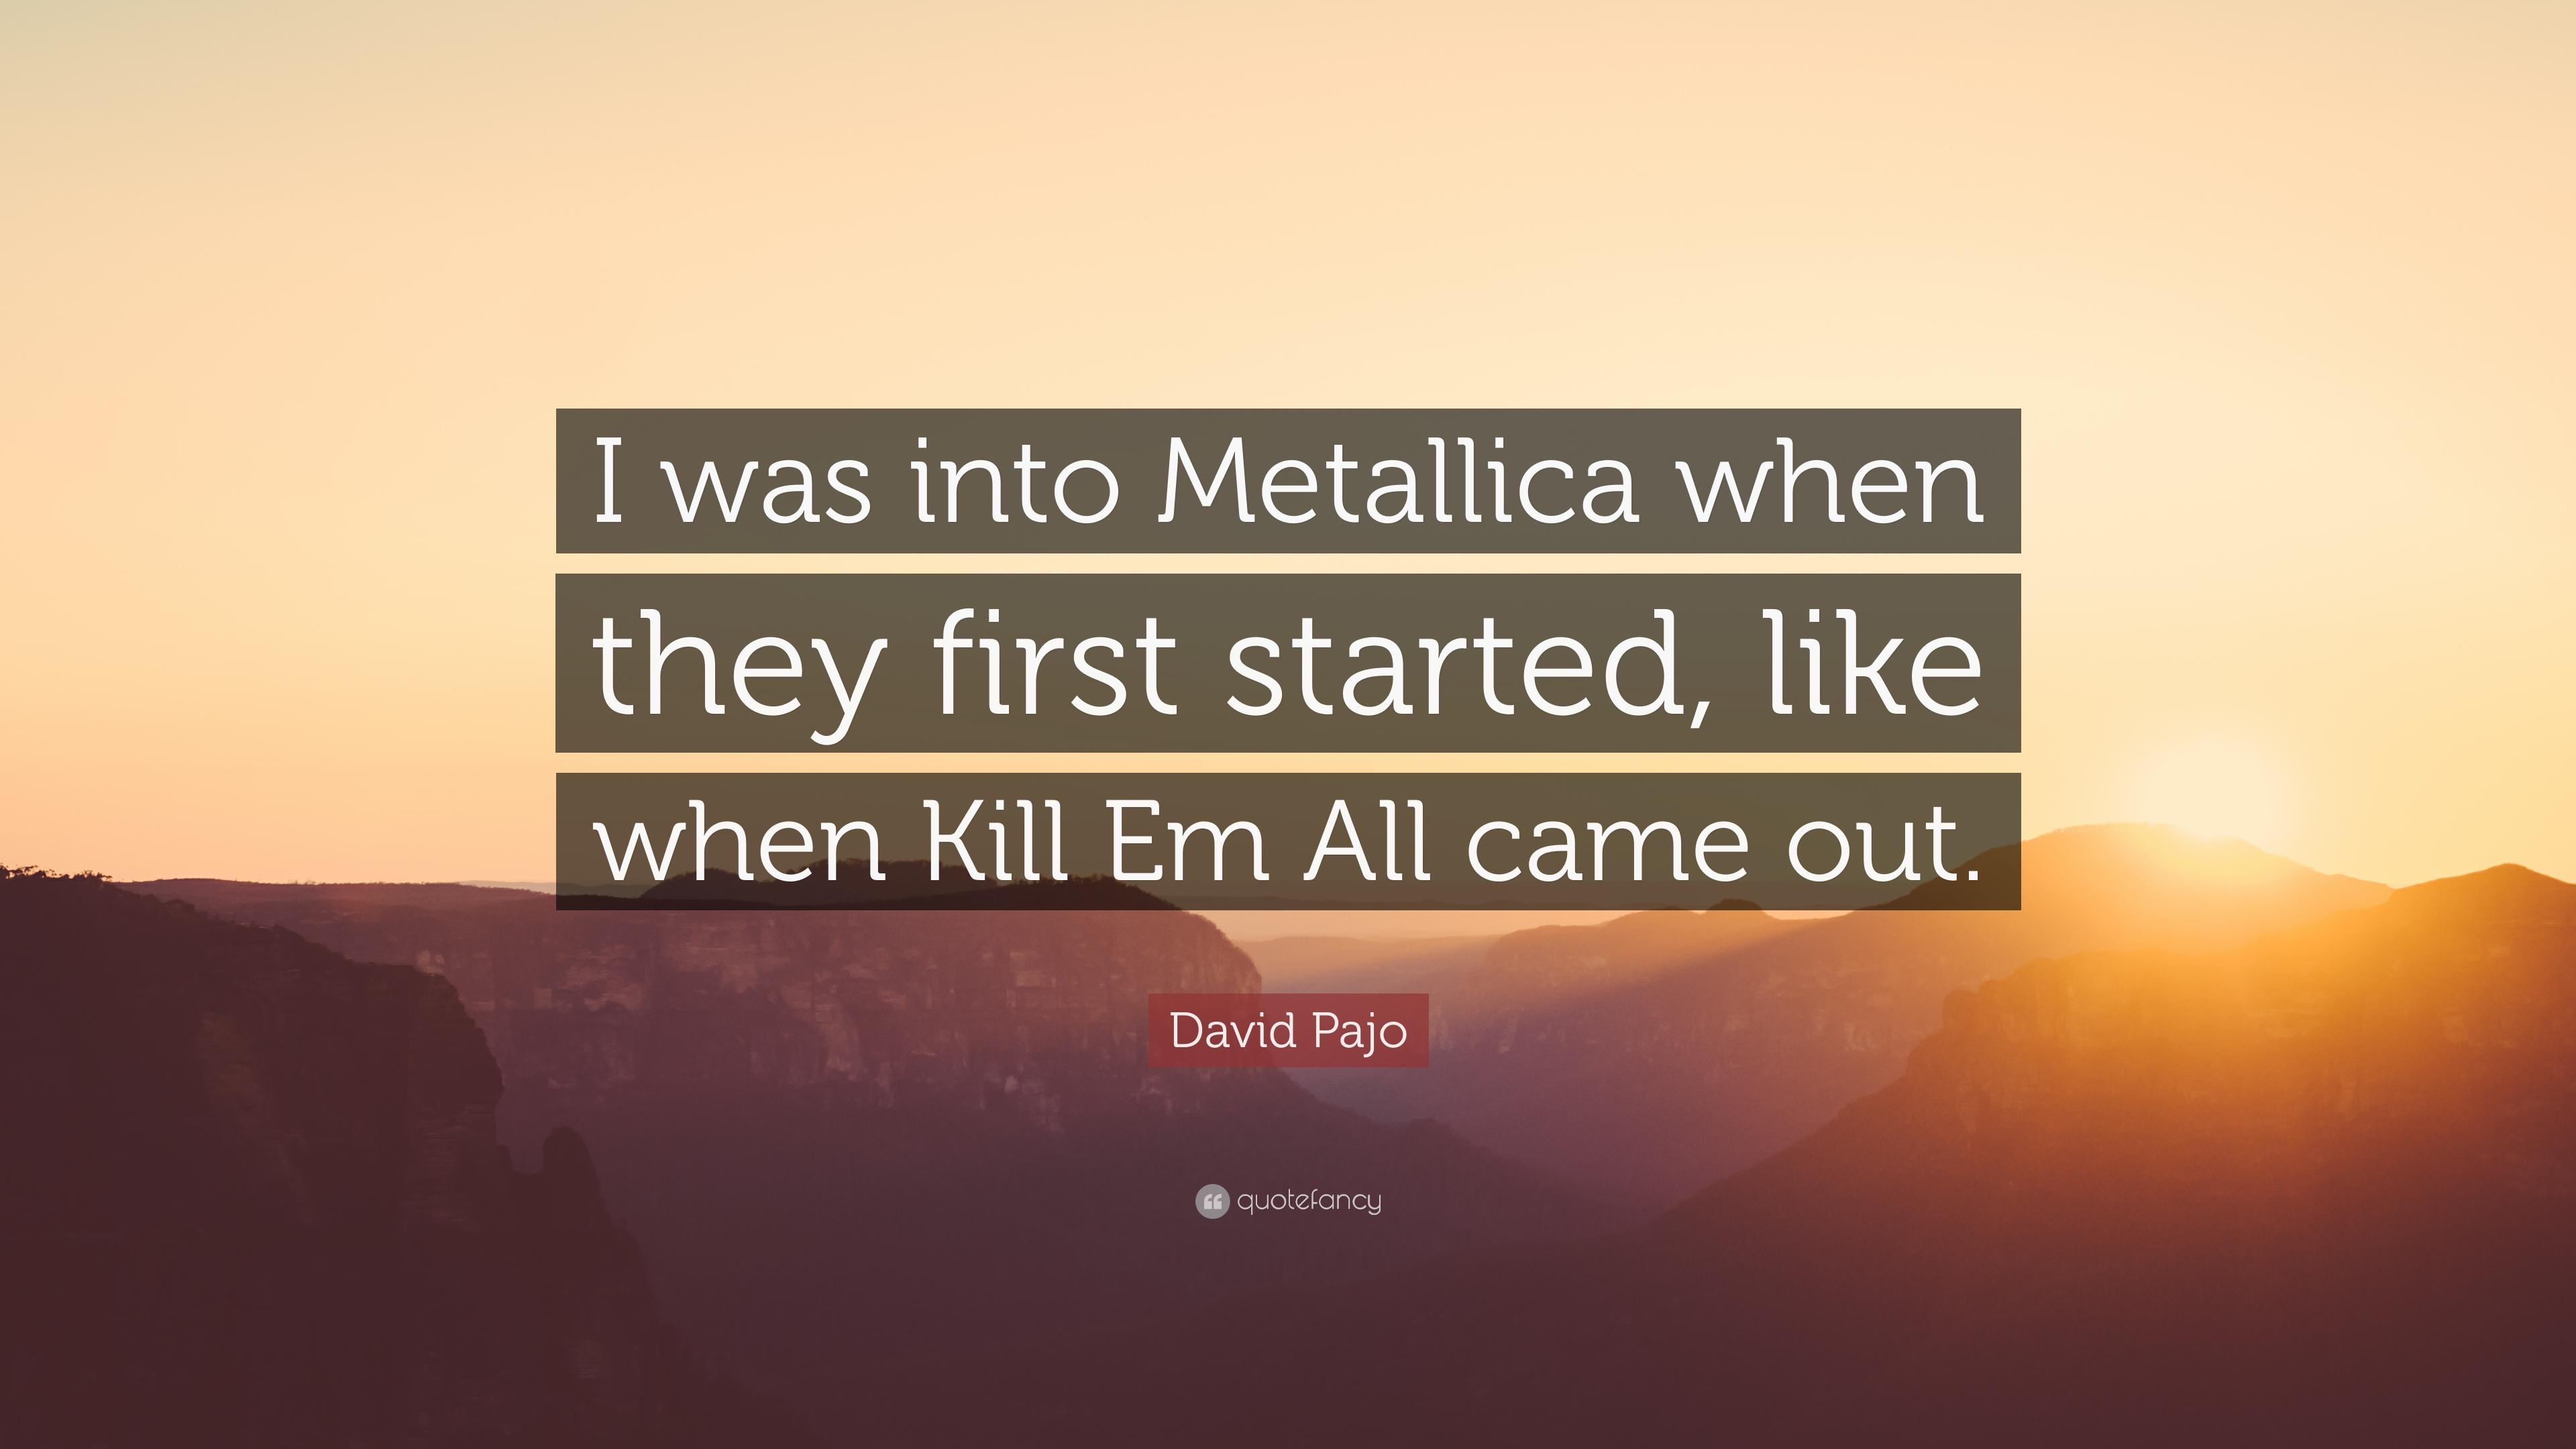 David Pajo Quote: “I was into Metallica when they first started